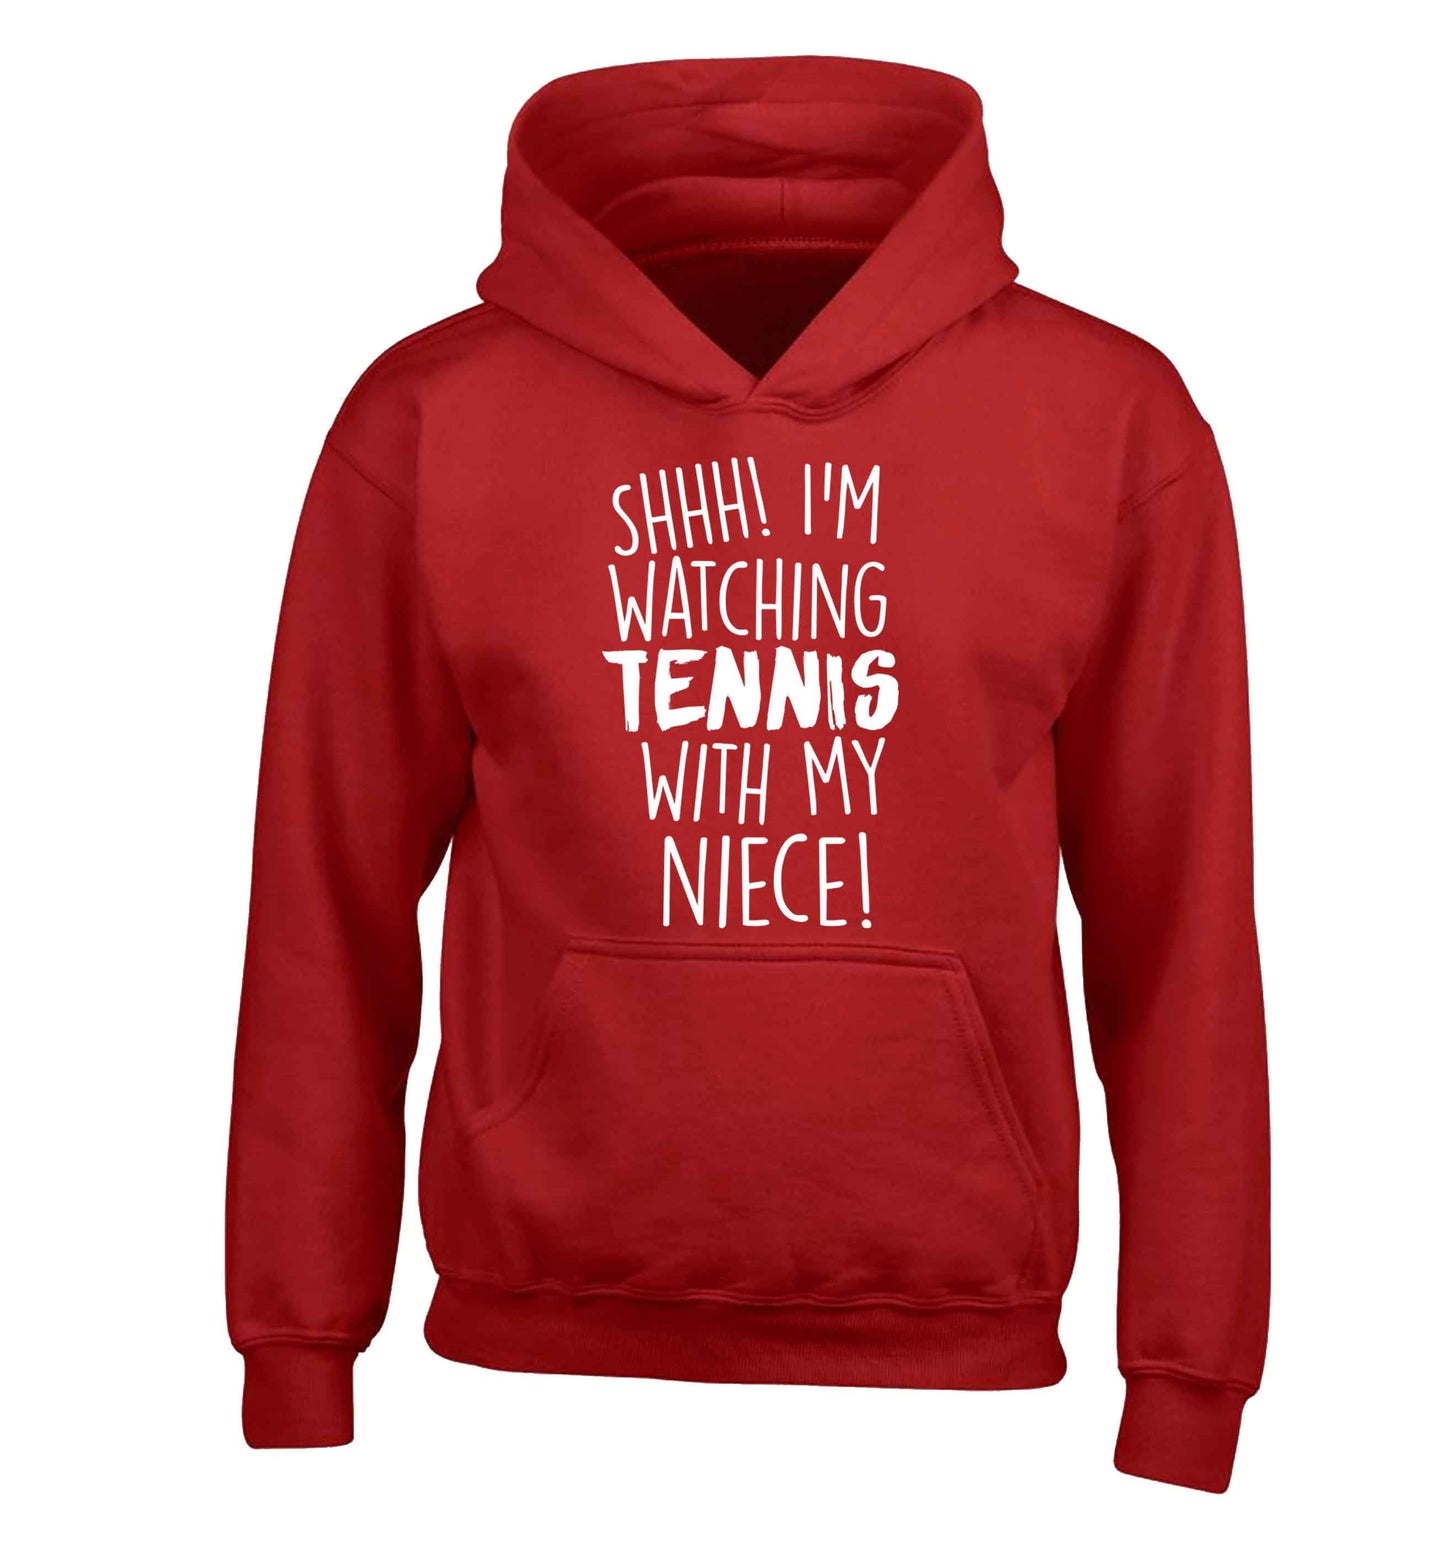 Shh! I'm watching tennis with my niece! children's red hoodie 12-13 Years